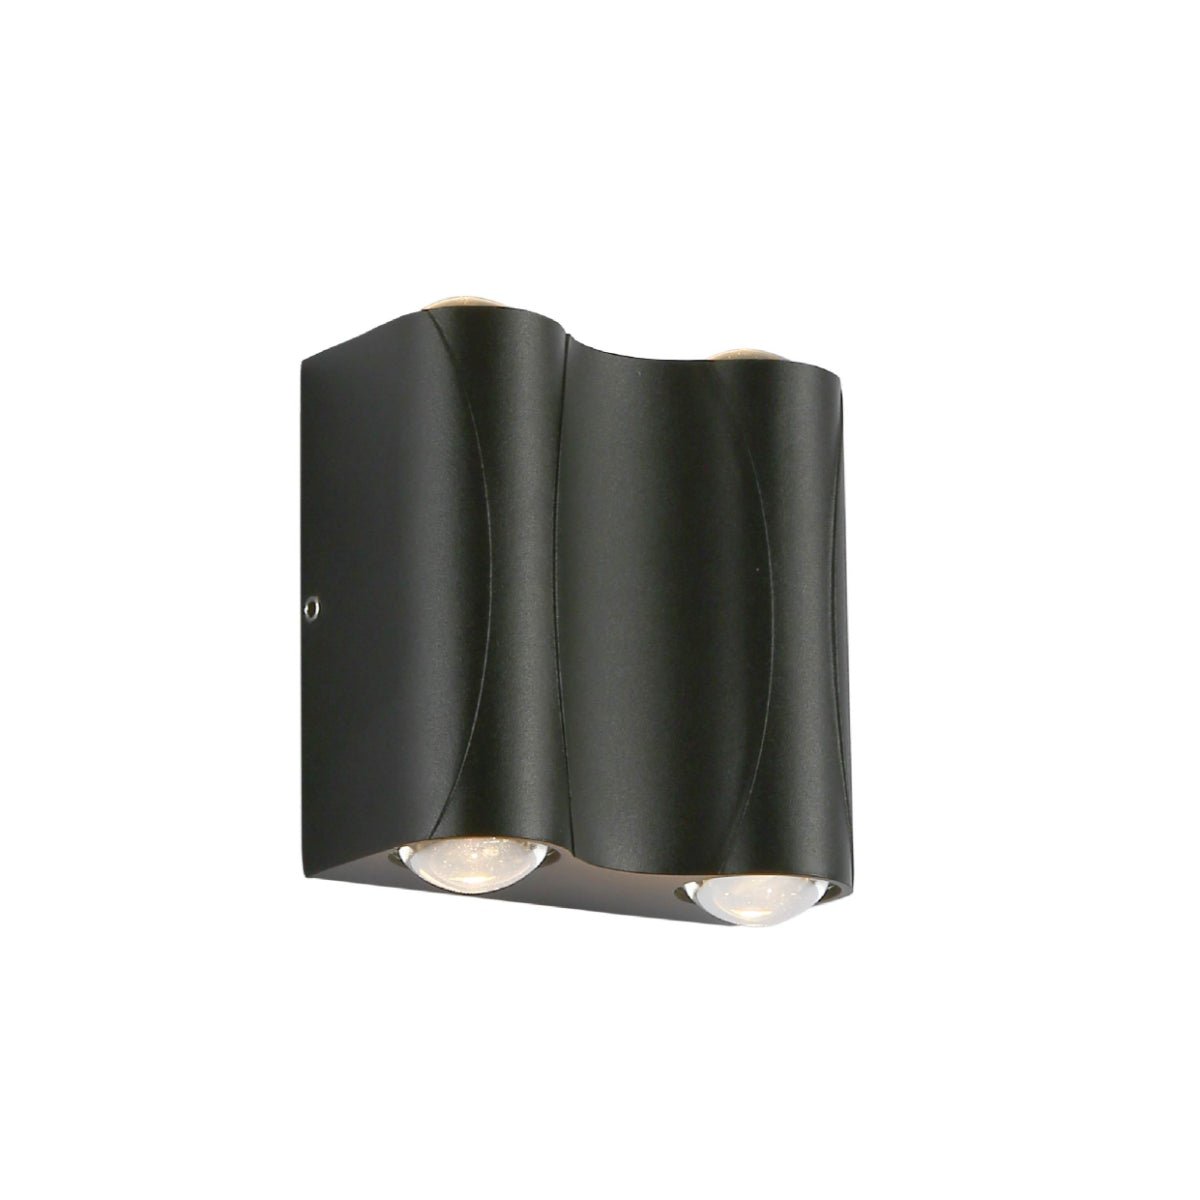 Main image of Black Corrugated Up Down Outdoor Modern LED Wall Light | TEKLED 183-03326